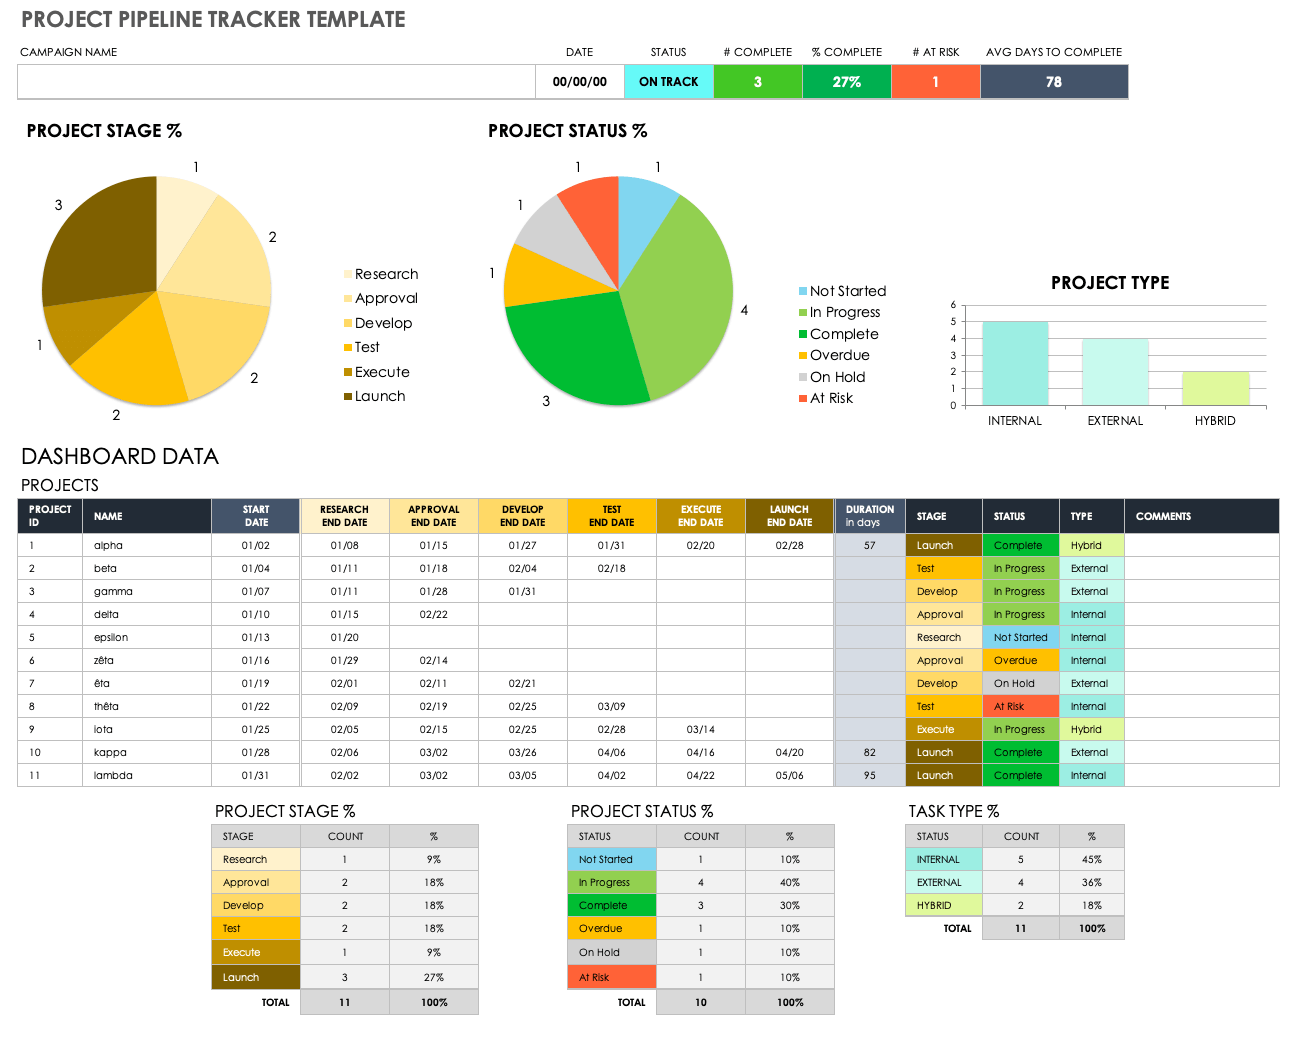 Project Pipeline Tracker Template